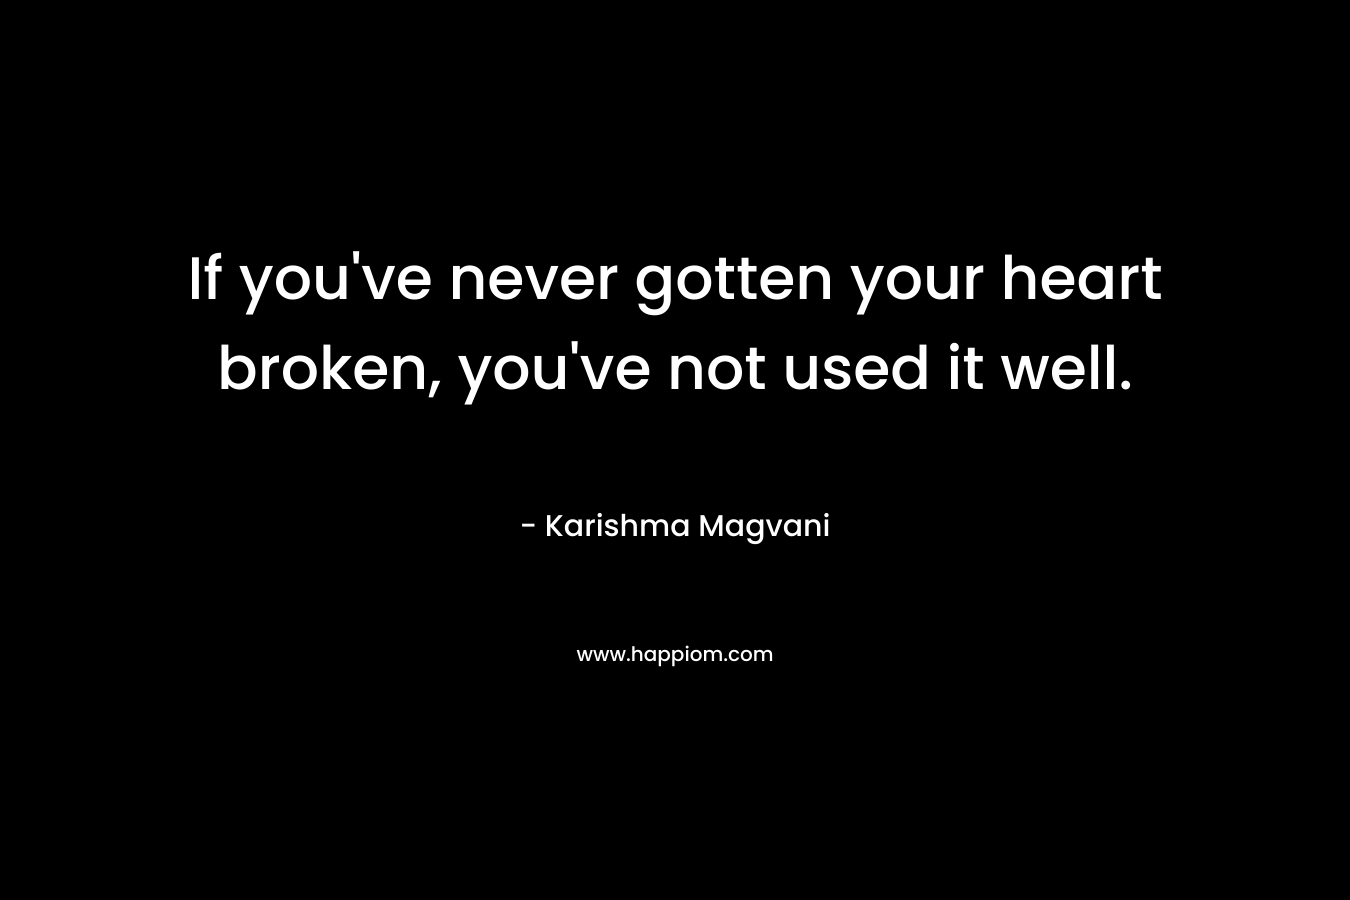 If you’ve never gotten your heart broken, you’ve not used it well. – Karishma Magvani